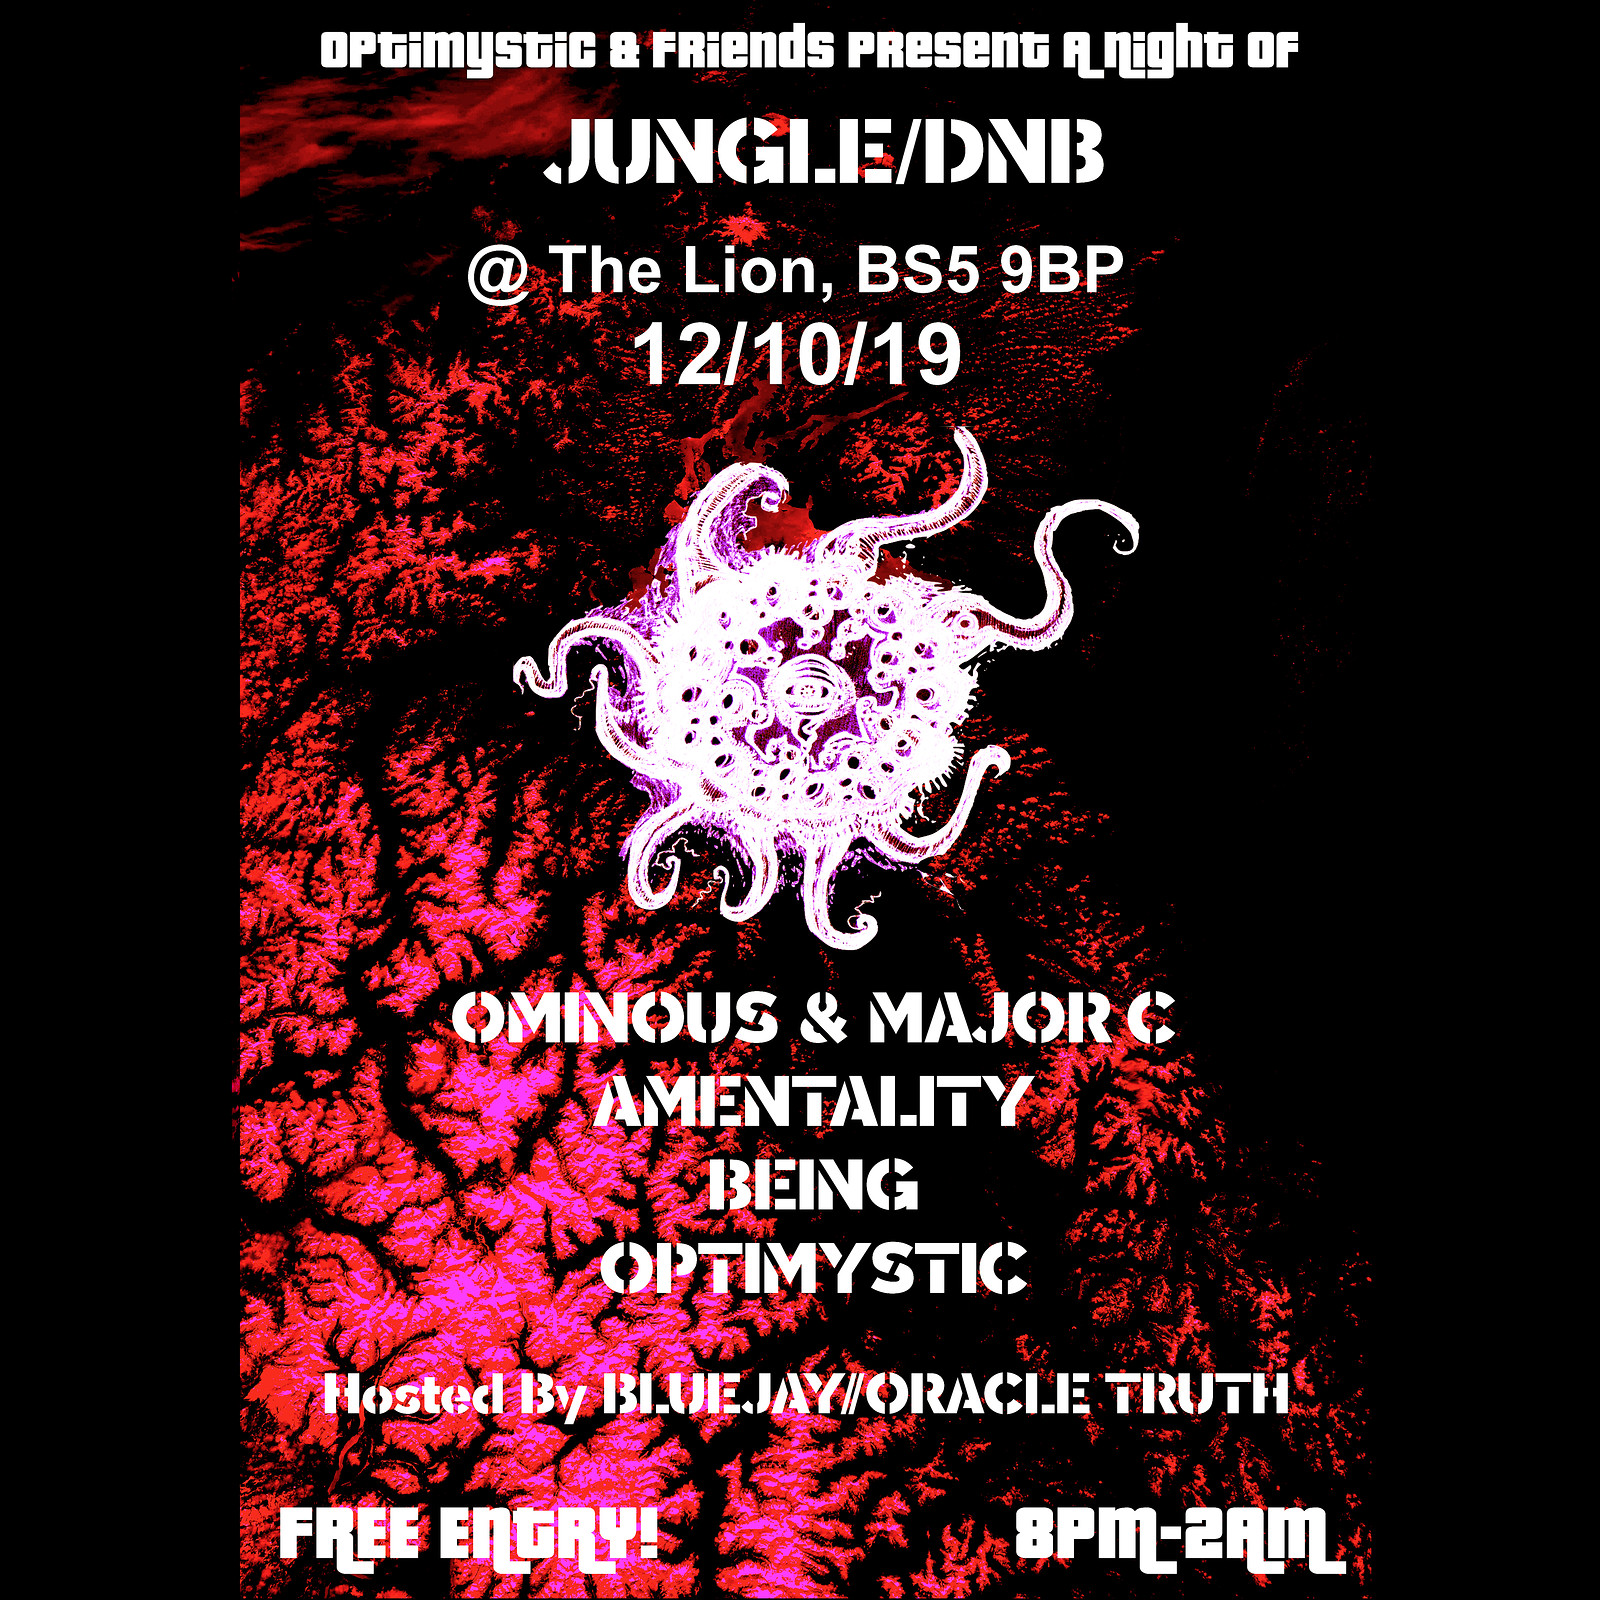 Optimystic & Friends Free Jungle/DnB Session 21 at The Lion BS5 9BP